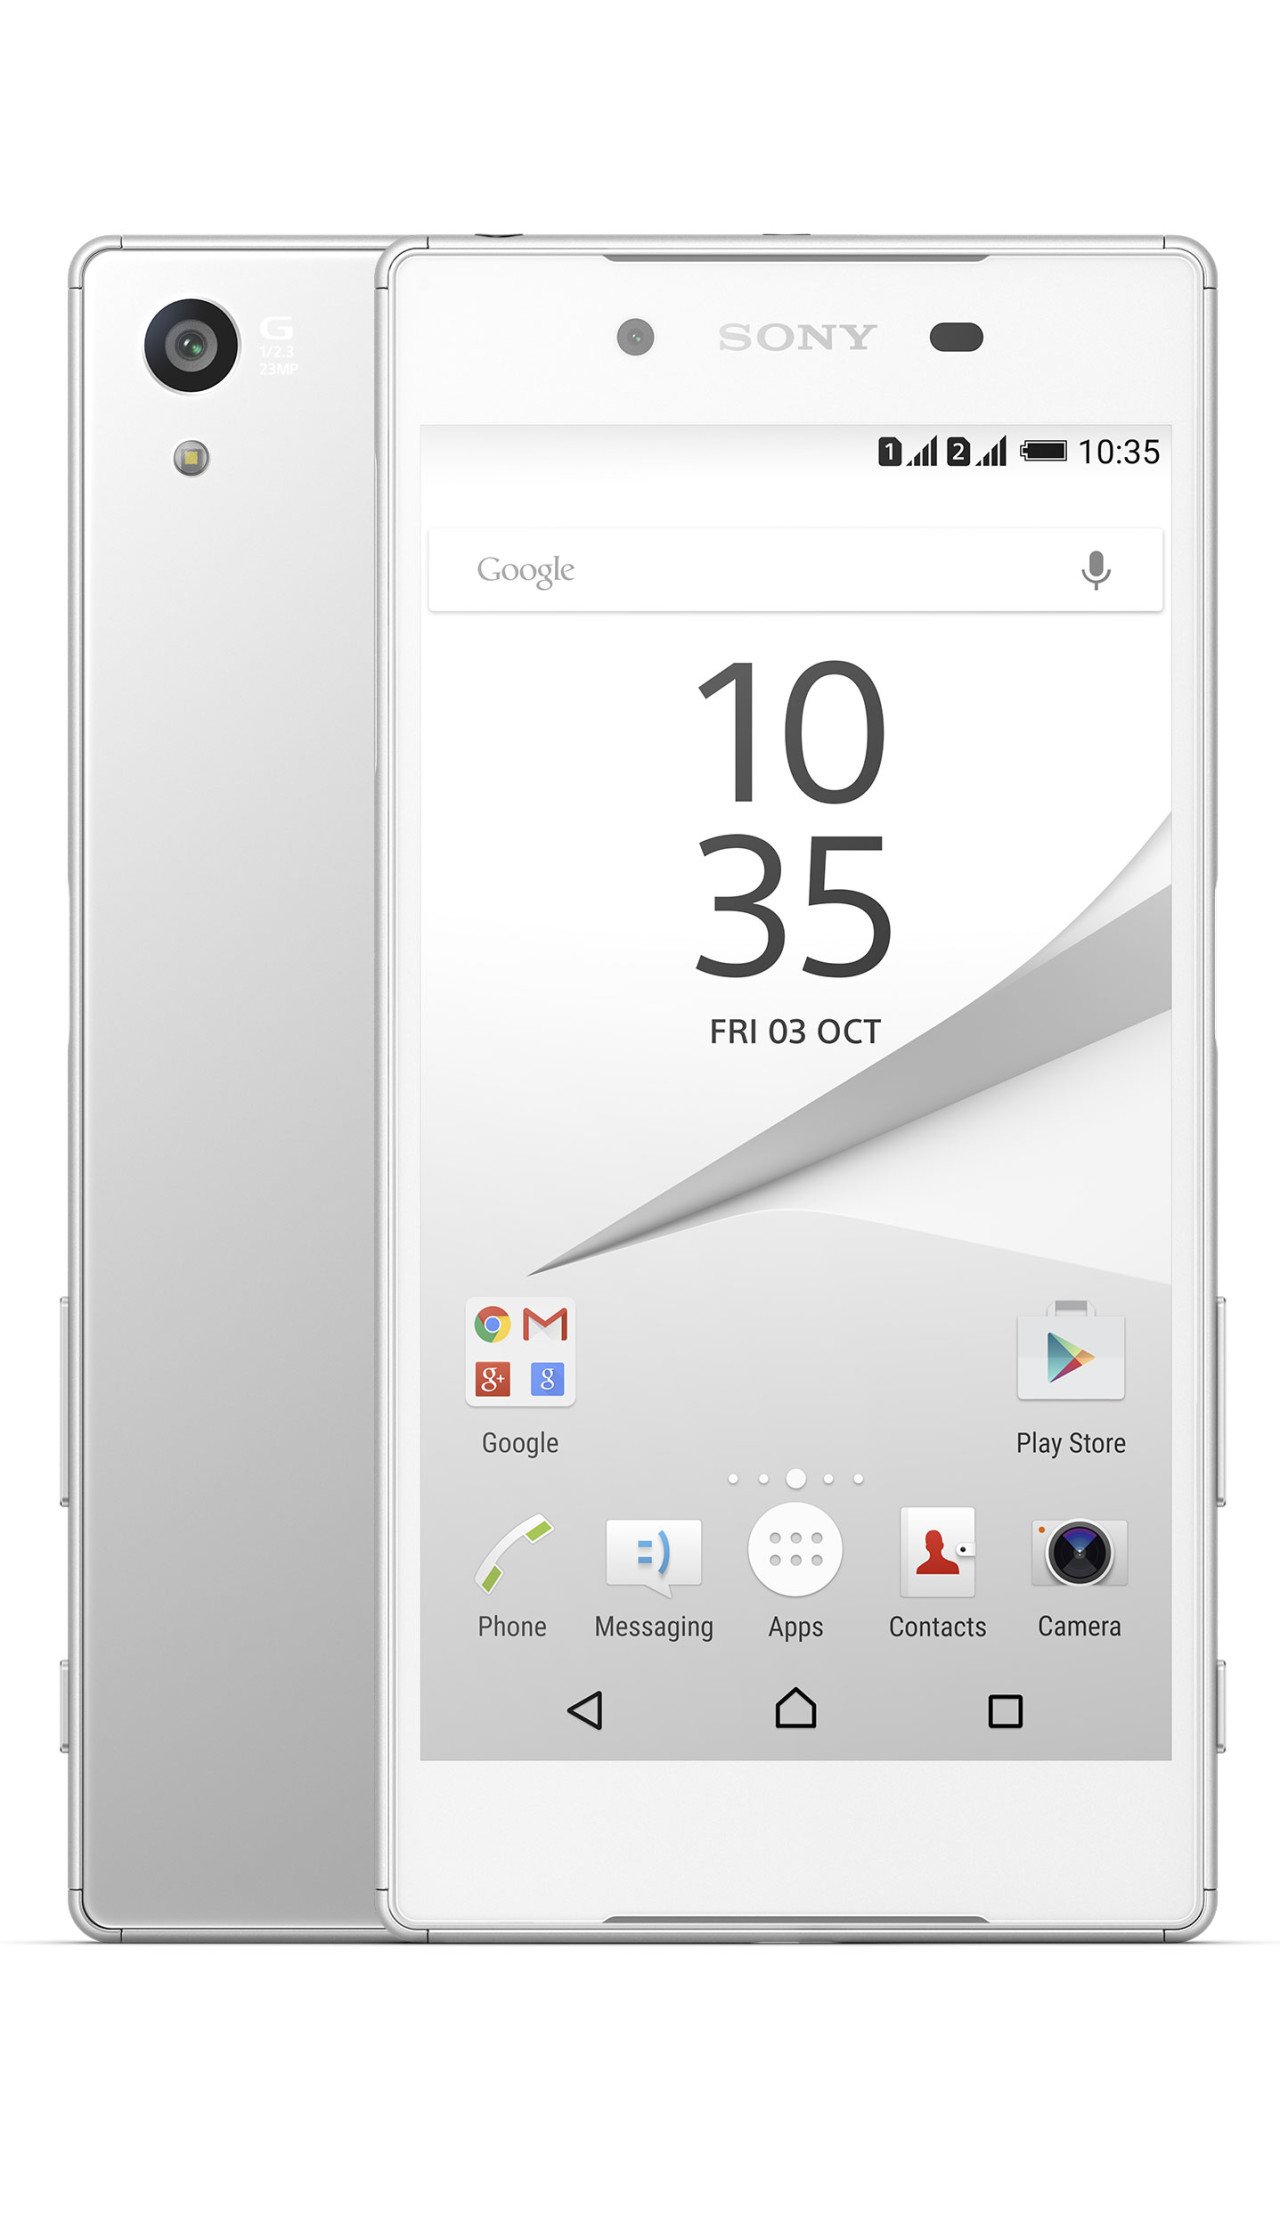 bælte Koncentration Motley Sony Xperia Z5 Compact specs, review, release date - PhonesData